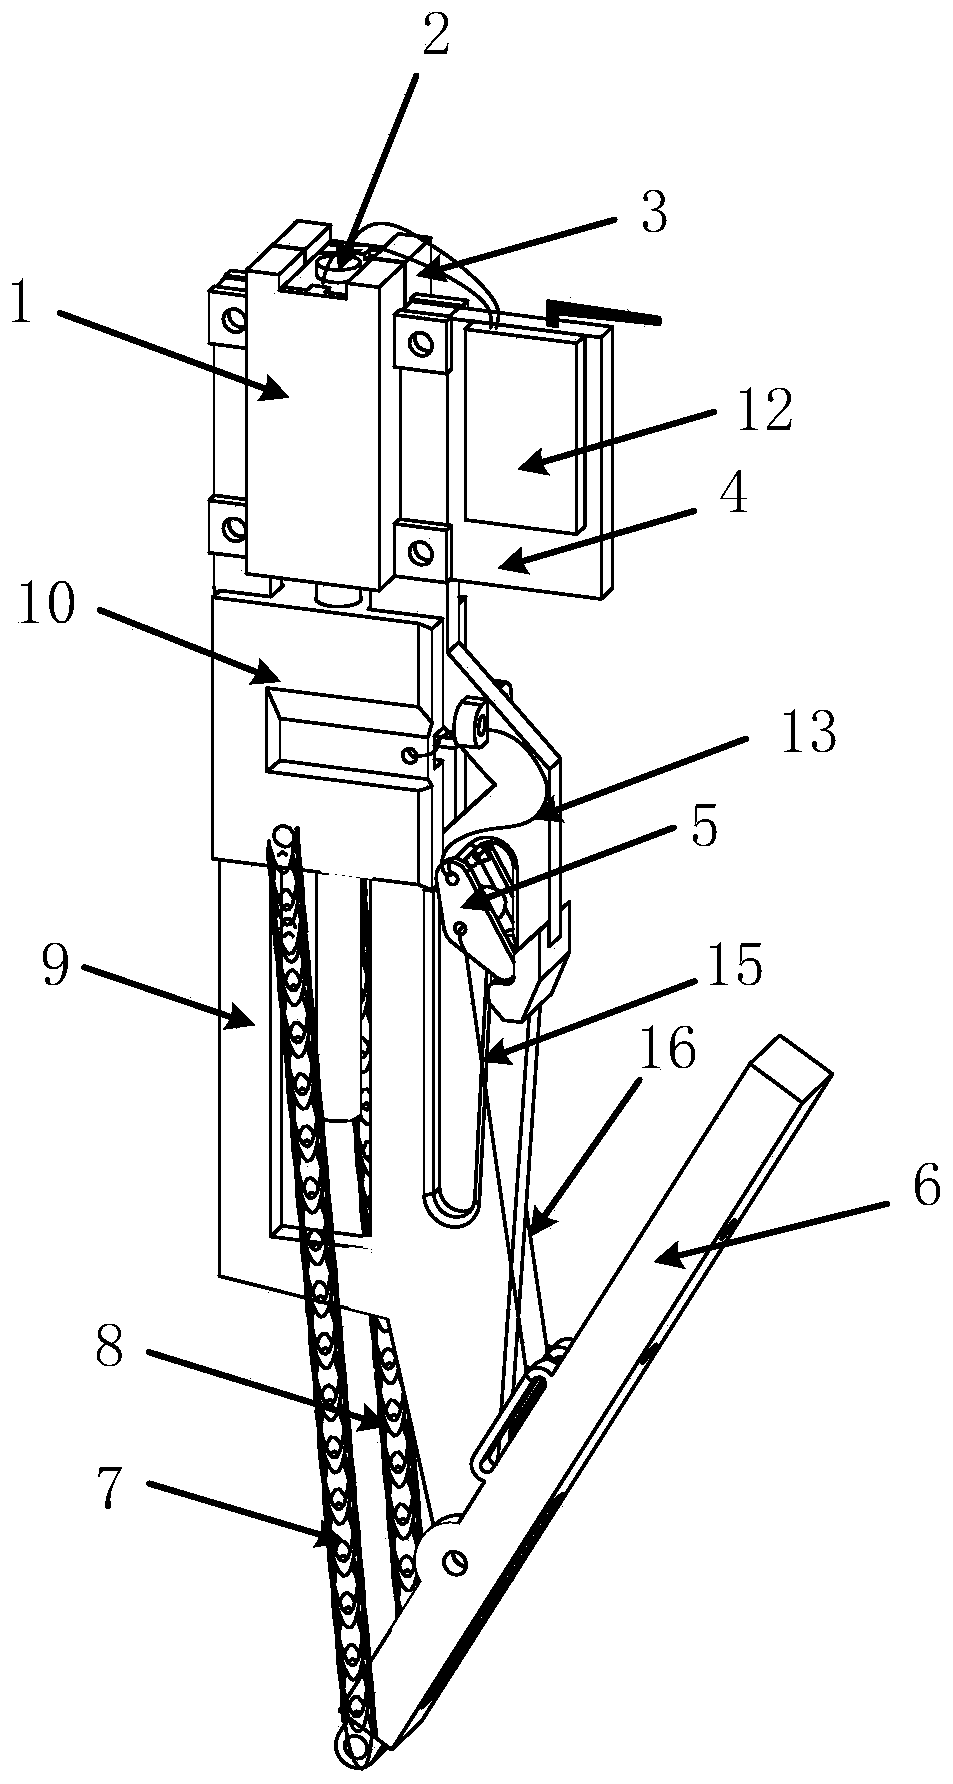 Movement bionic mechanism for simulating jumper jumping device and jumping method of movement bionic mechanism